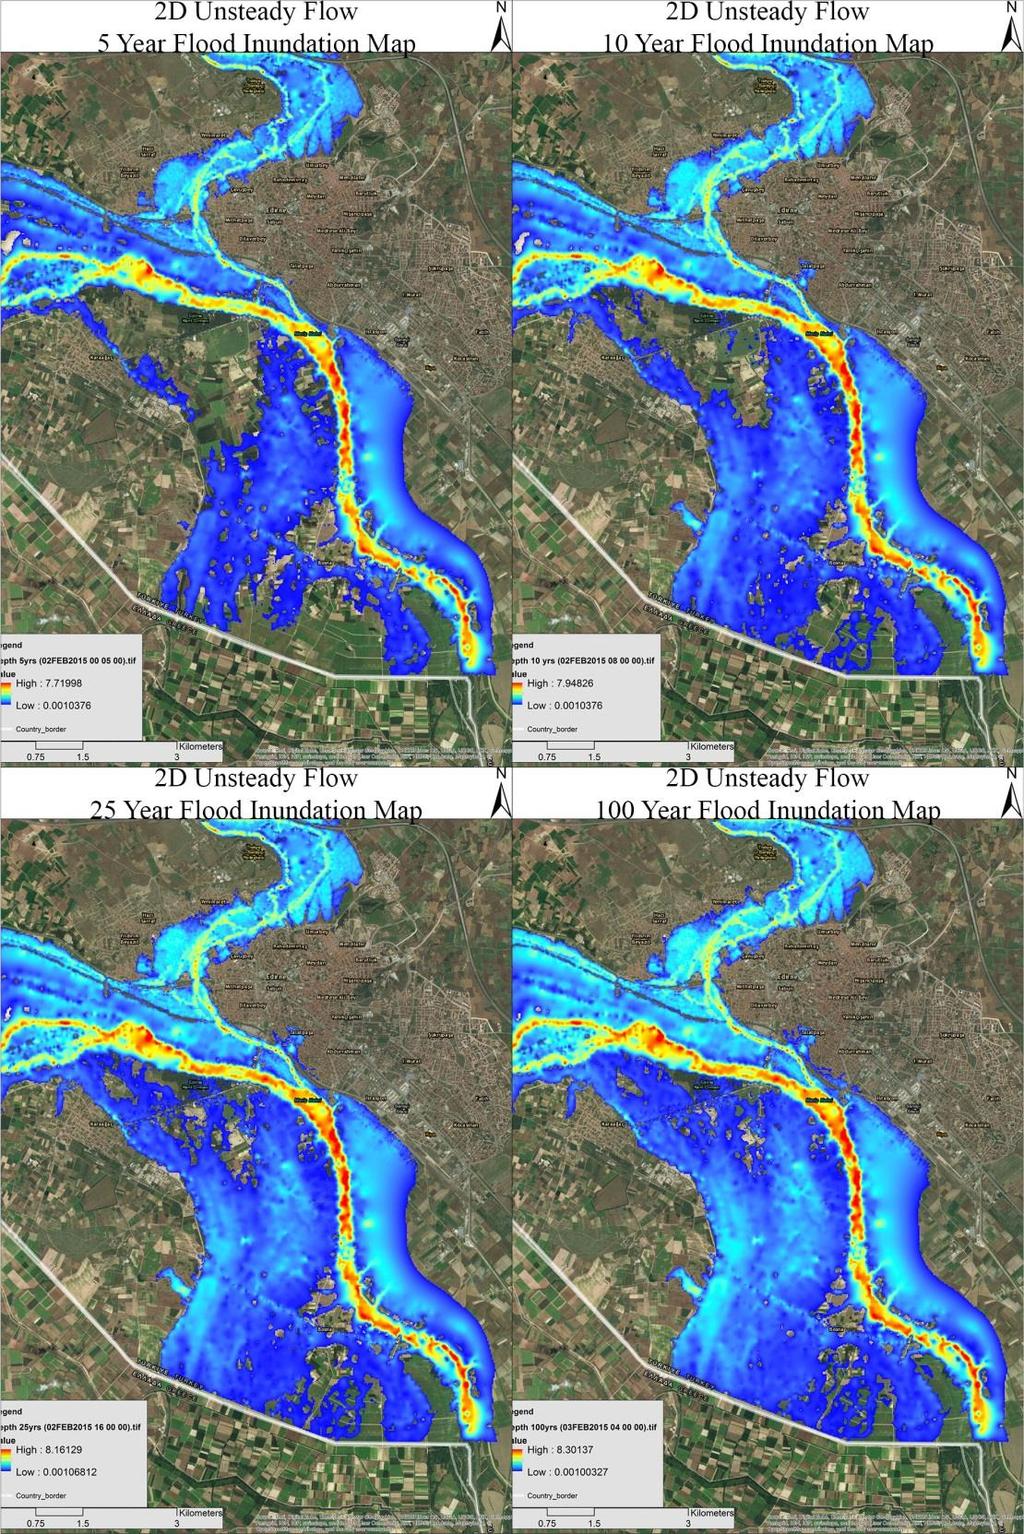 Figure 2D Unsteady Flow Inundation Maps of Floods with Different Return Periods (Without Levees).